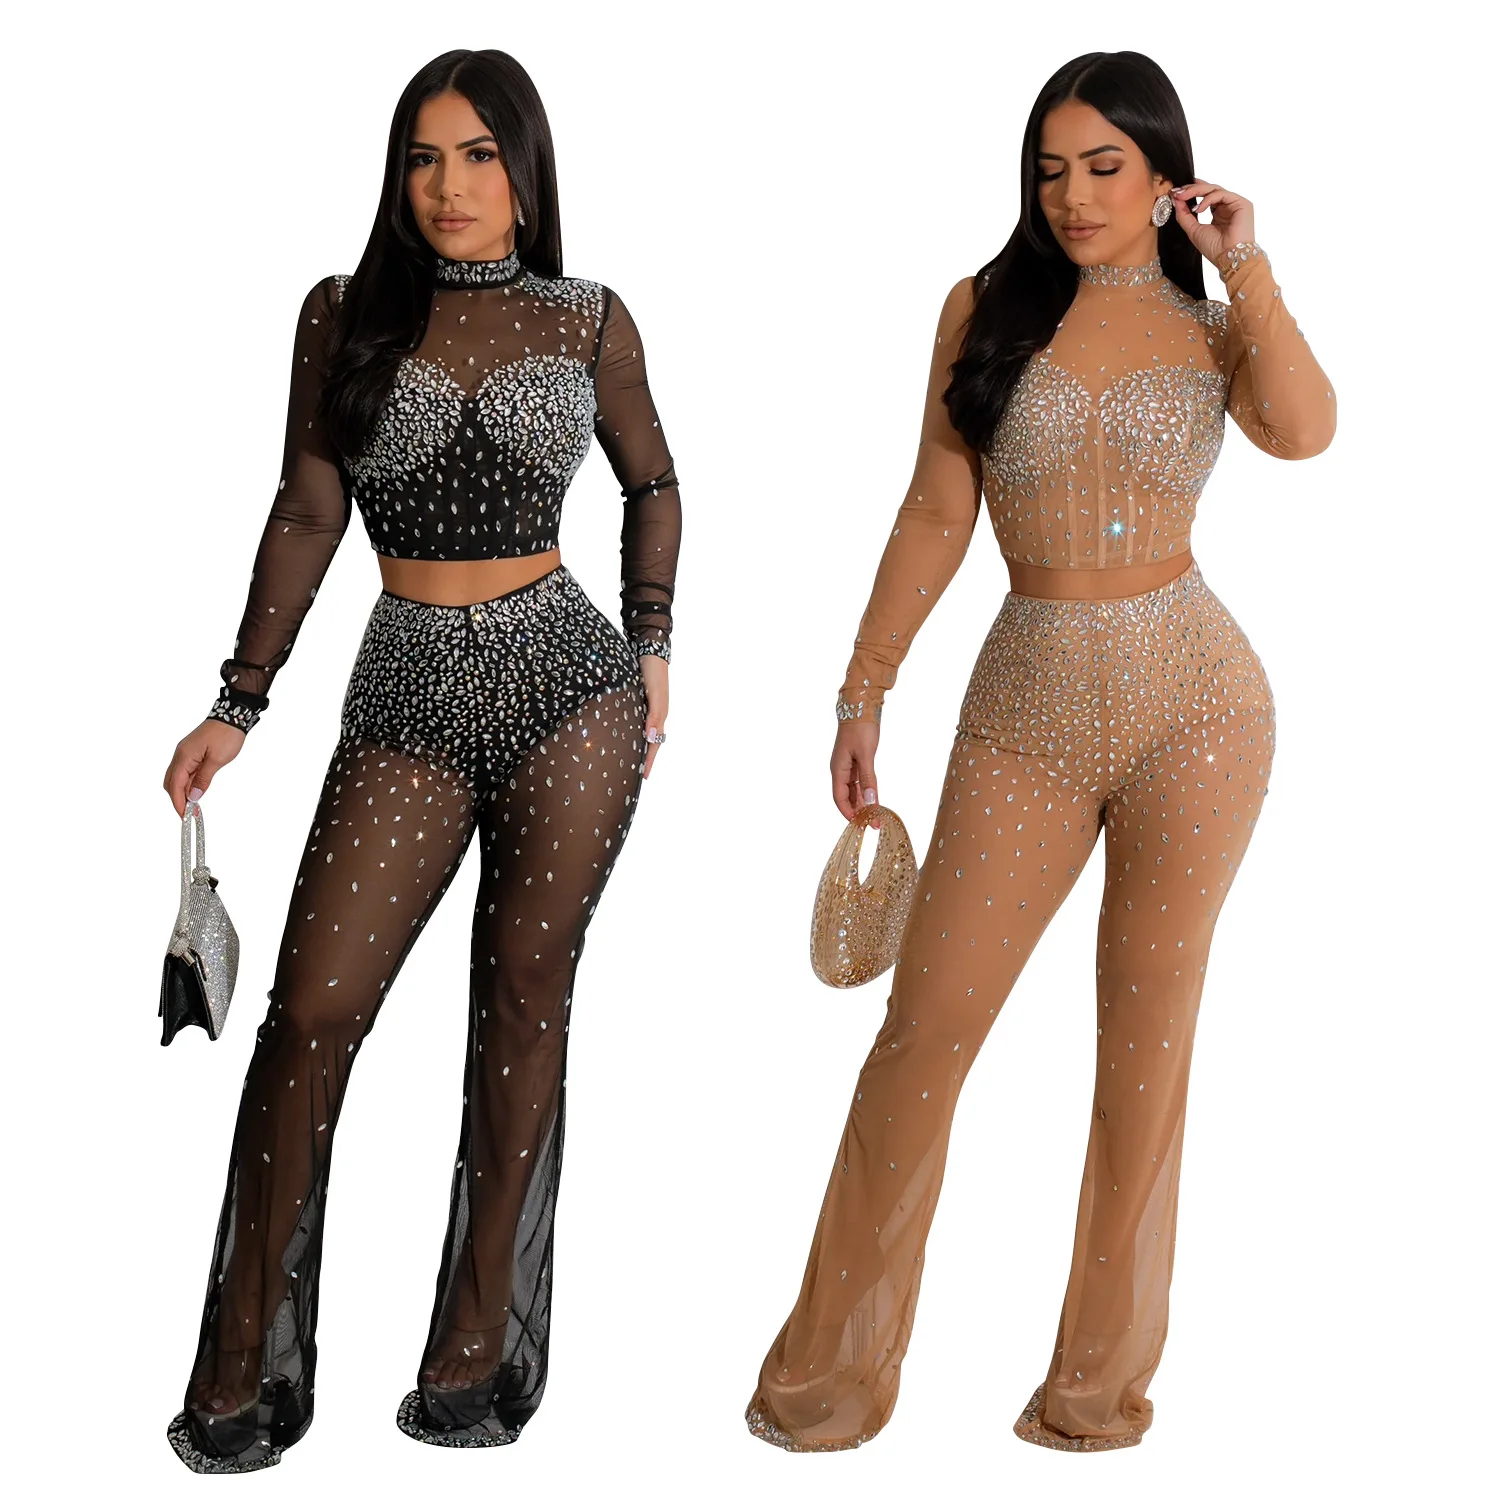 EINYOO Y2k Rhinestone Mesh See Through Long Sleeve Dresses Set for Women Birthday Sexy Night Club Party 2 Piece Sets Outfit Traf rhinestone belts for women men western cowgirl cowboy studded belt luxury brand designer leather belt for jeans pants dresses